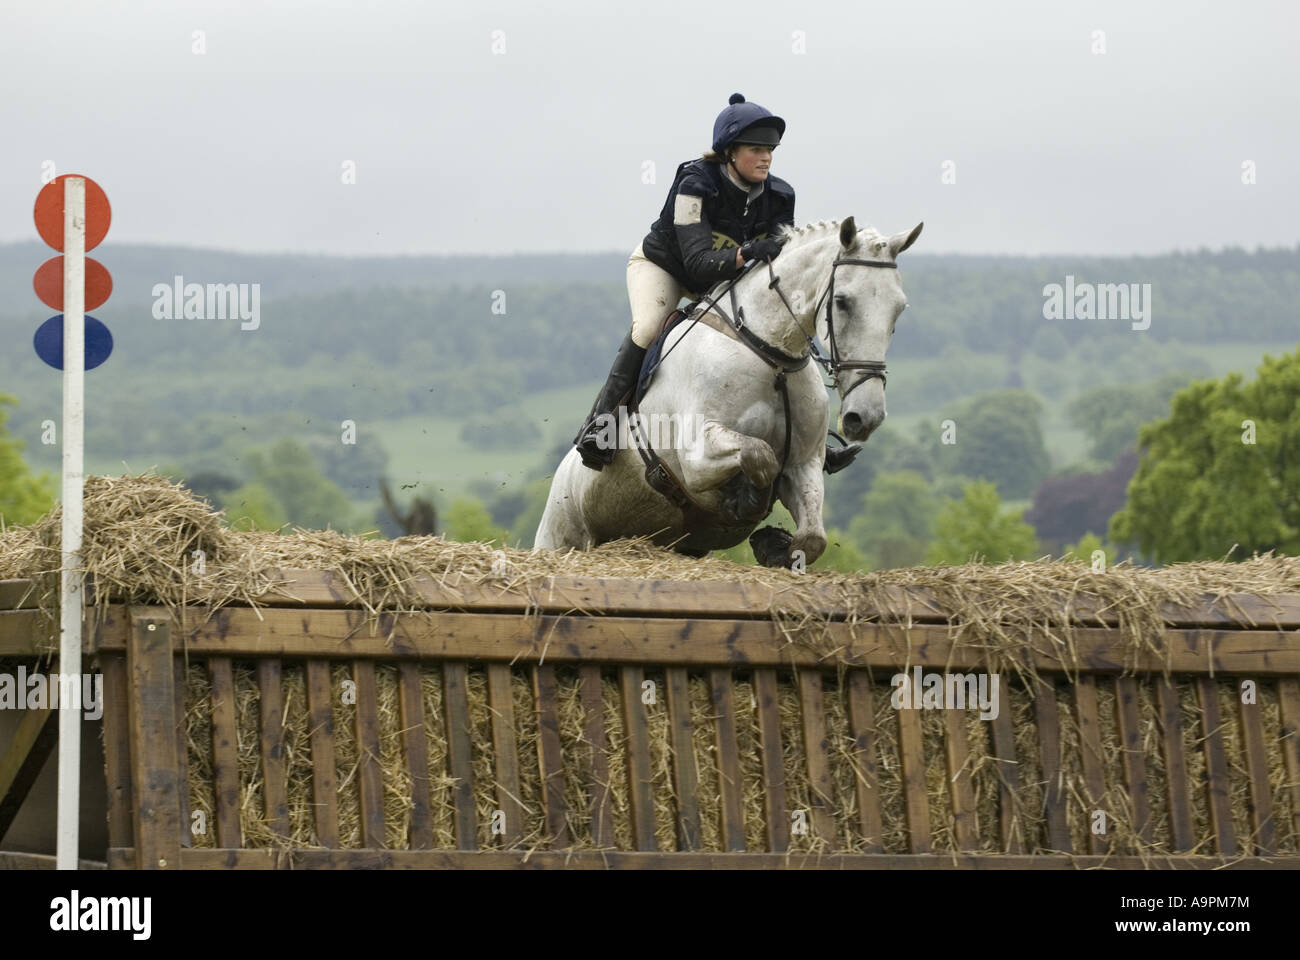 Three Day Event Rider Vicky Brake Taking part in the Cross Country Phase at the Chatsworth House Horse Trial 2007 Stock Photo